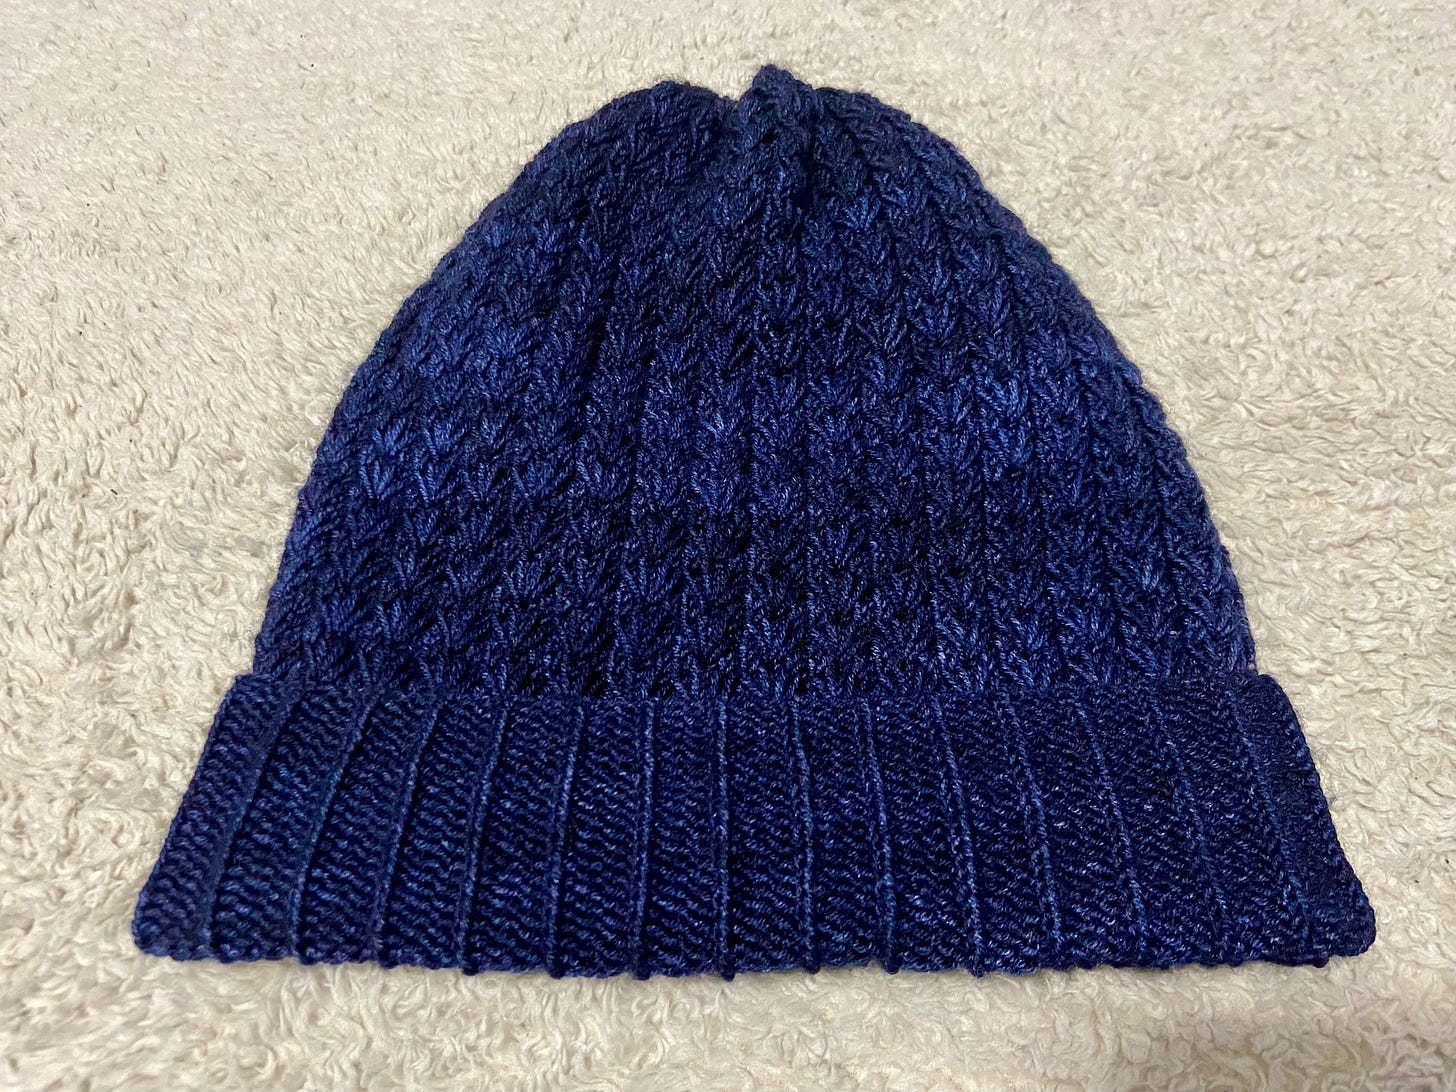 The Constellate Hat with a folded brim is hand-knitted with dark blue yarn and resting on a cream-colored throw.